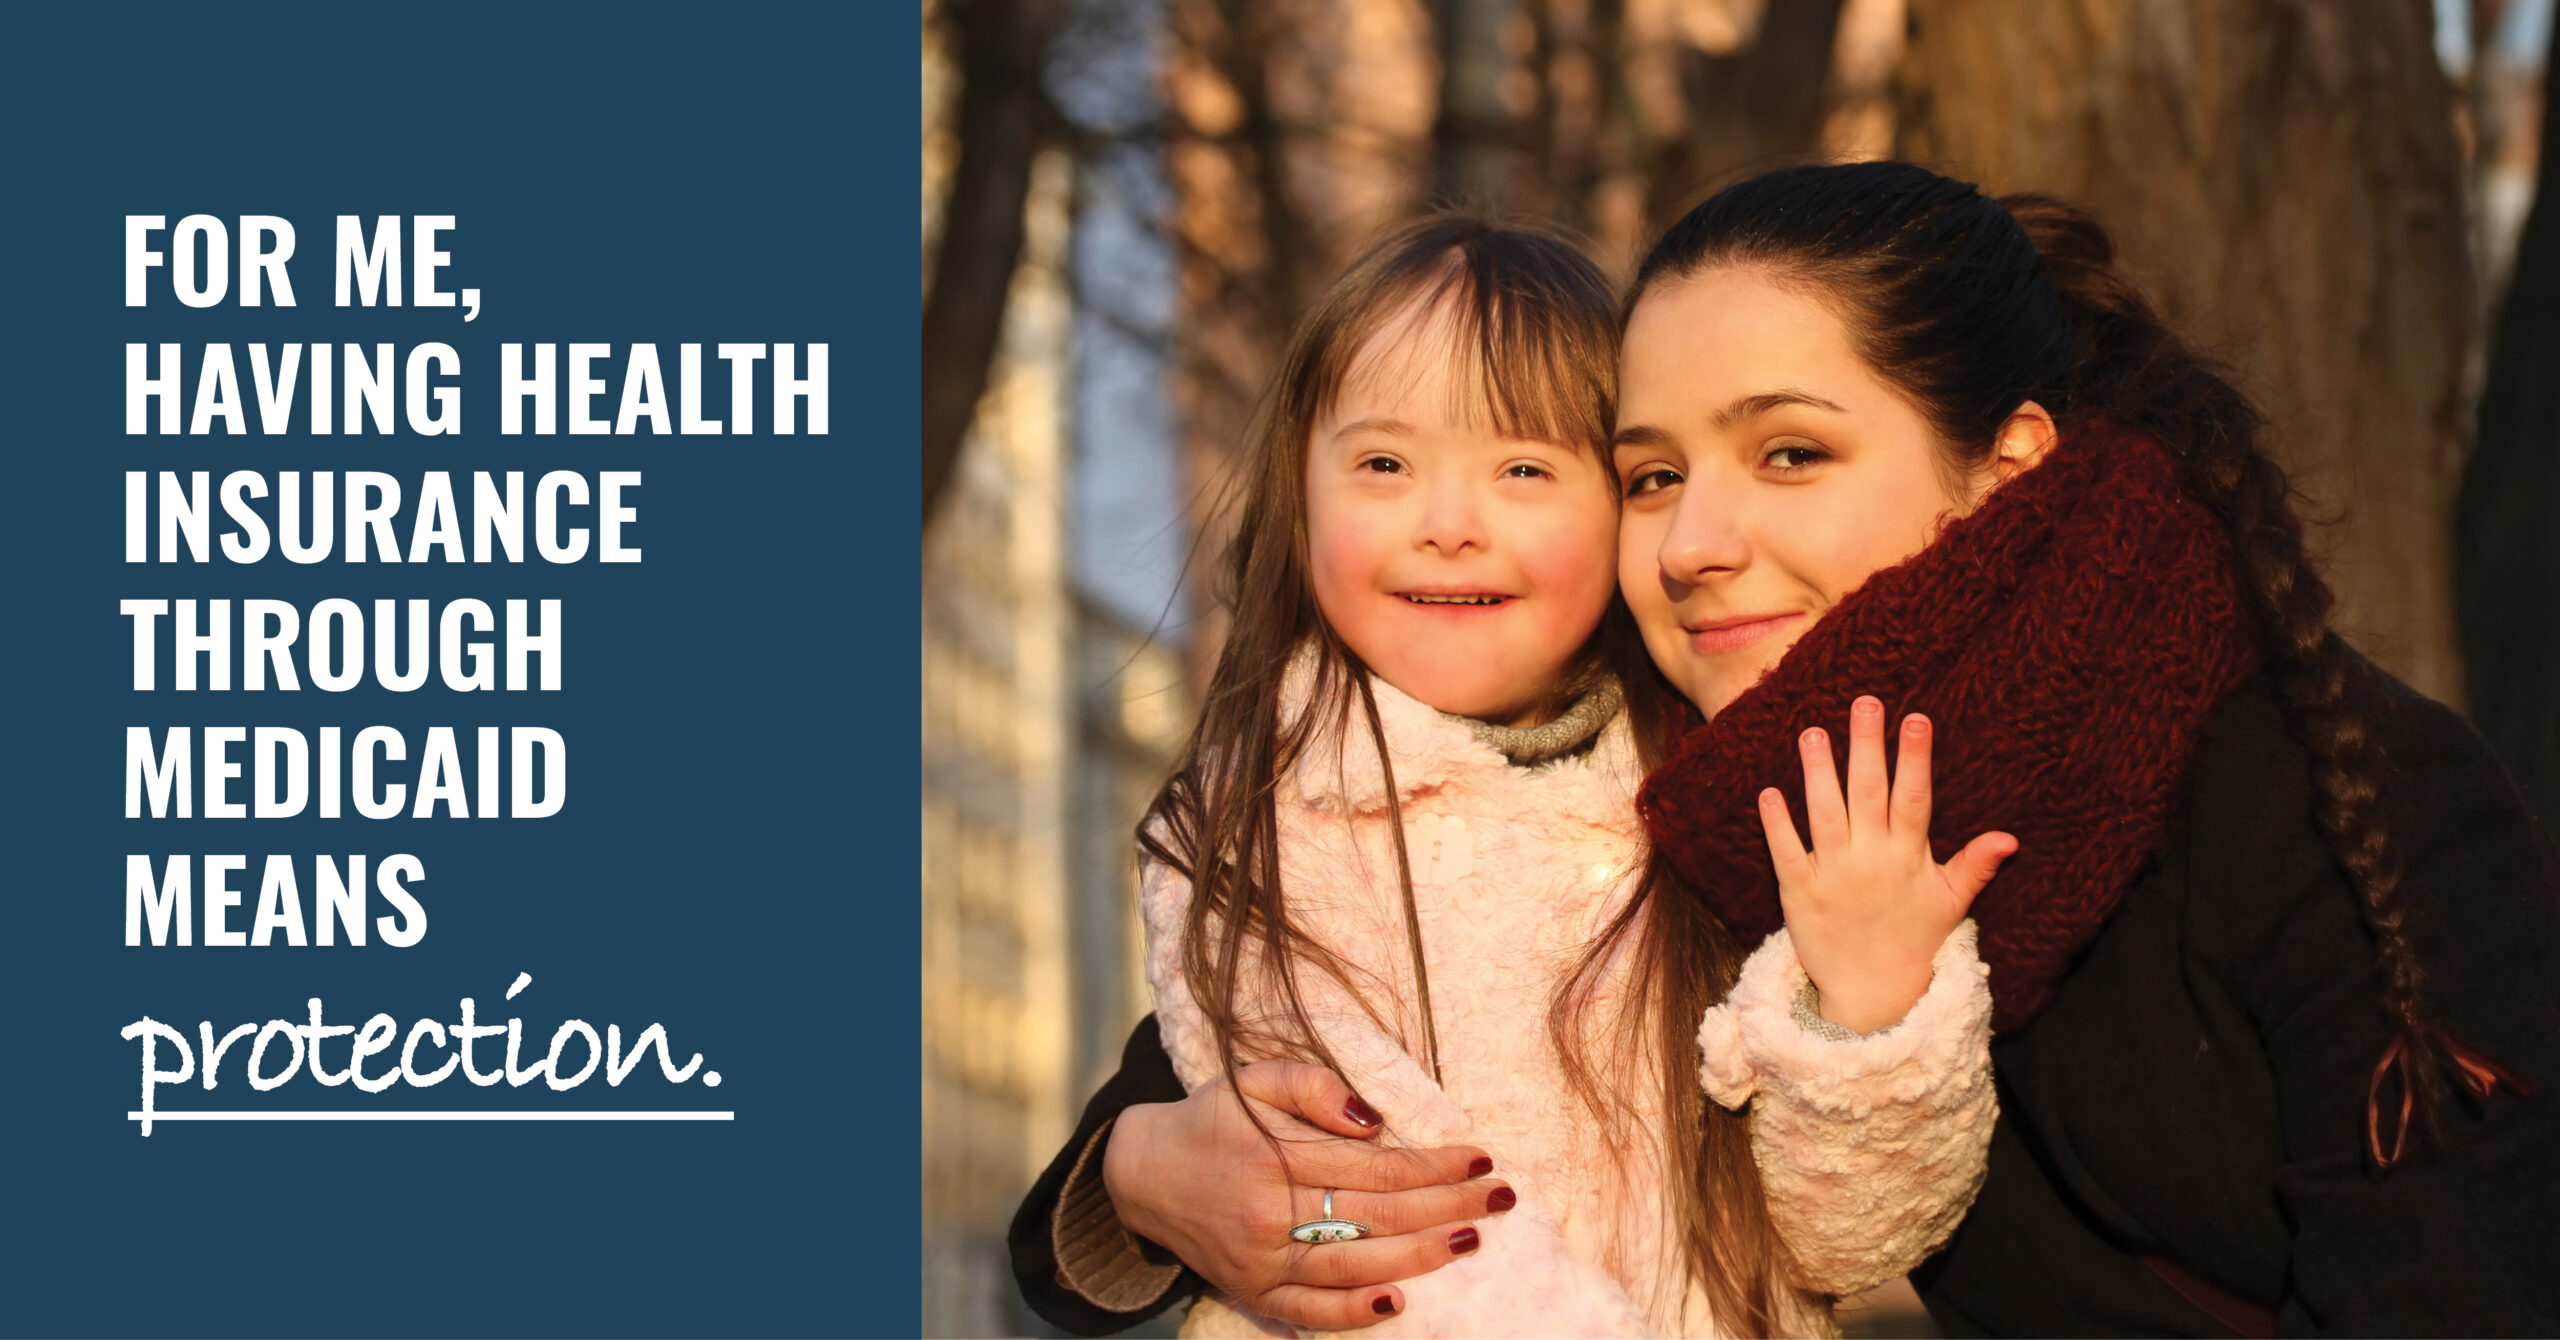 A woman and little girl with Down syndrome and the message “for me, having health insurance through Medicaid means protection.”